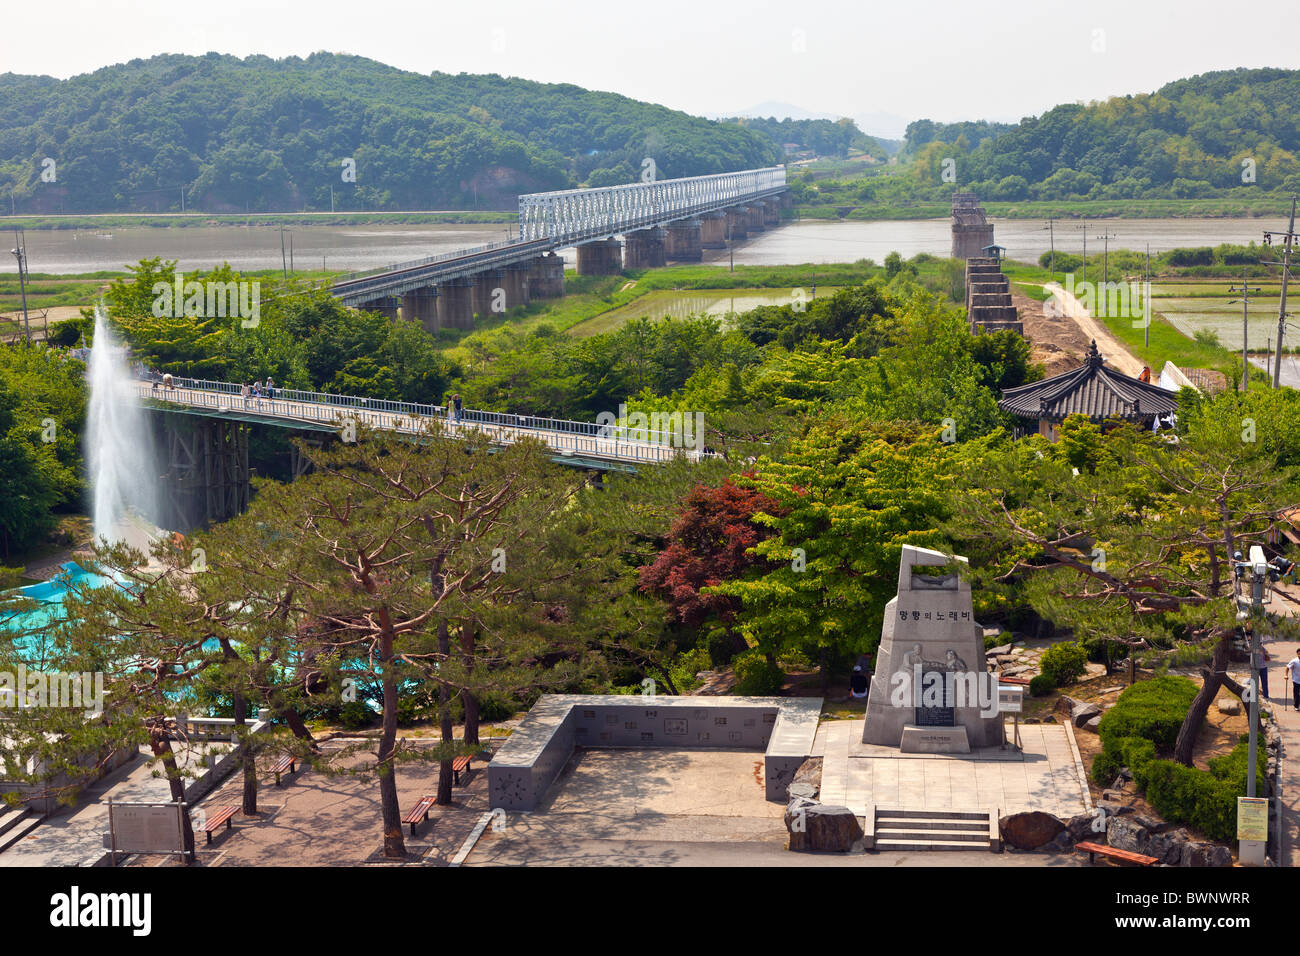 Old and new Freedom railway bridges over Imjin River between North and South Korea, DMZ Demilitarized Zone, South Korea. JMH3828 Stock Photo